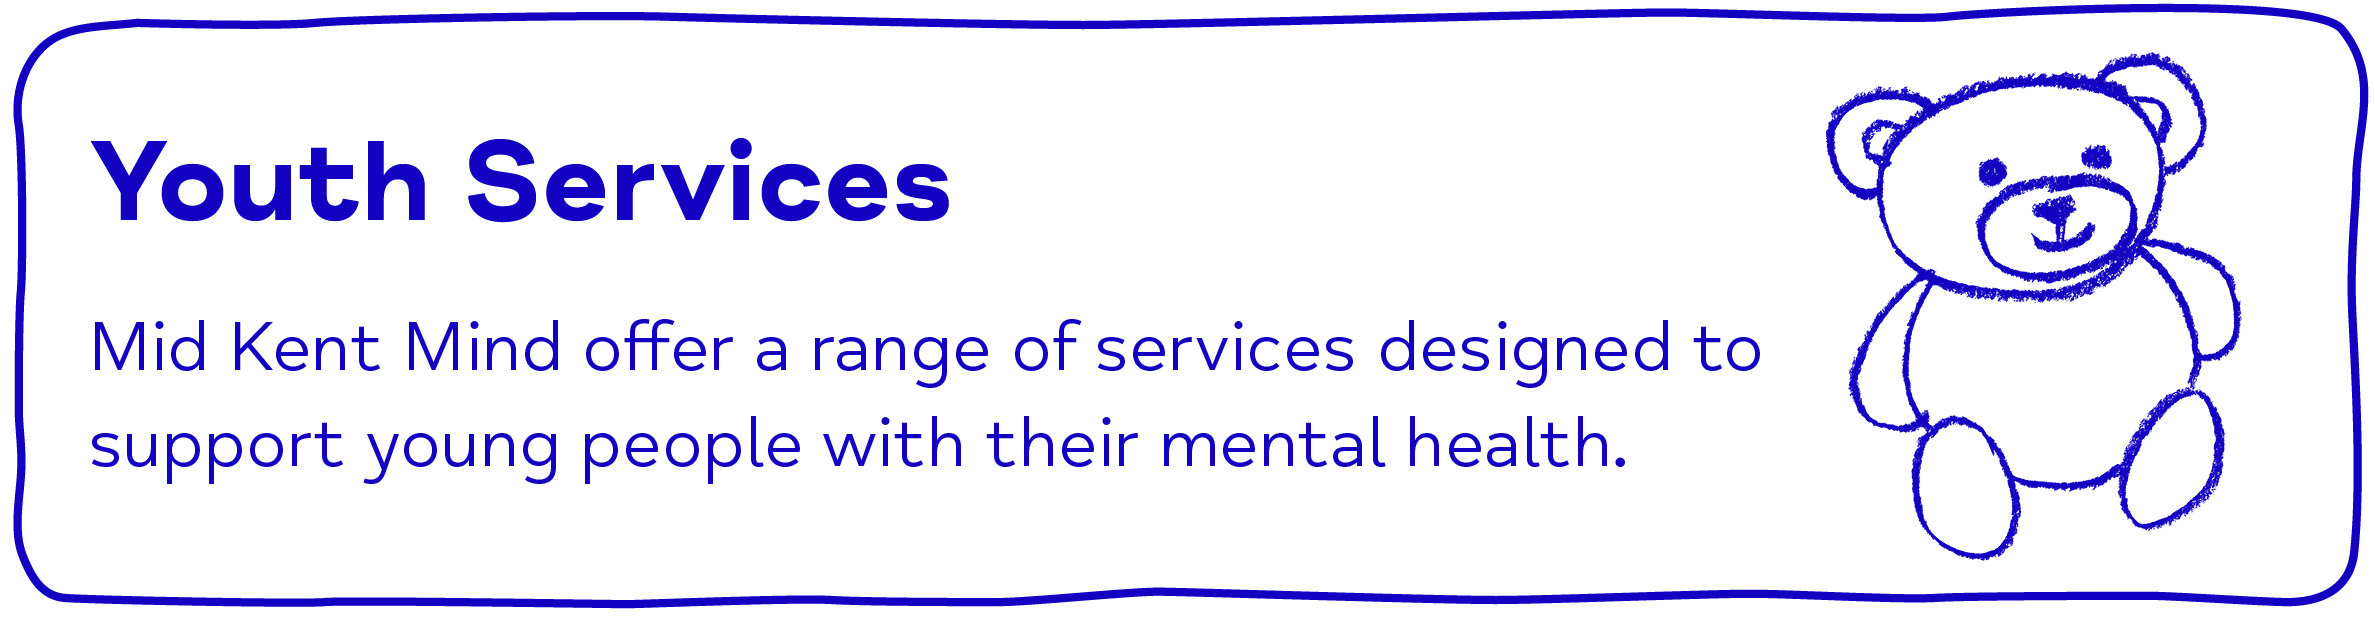 Youth Services. Mid Kent Mind offer a range of services designed to support young people with their mental health.